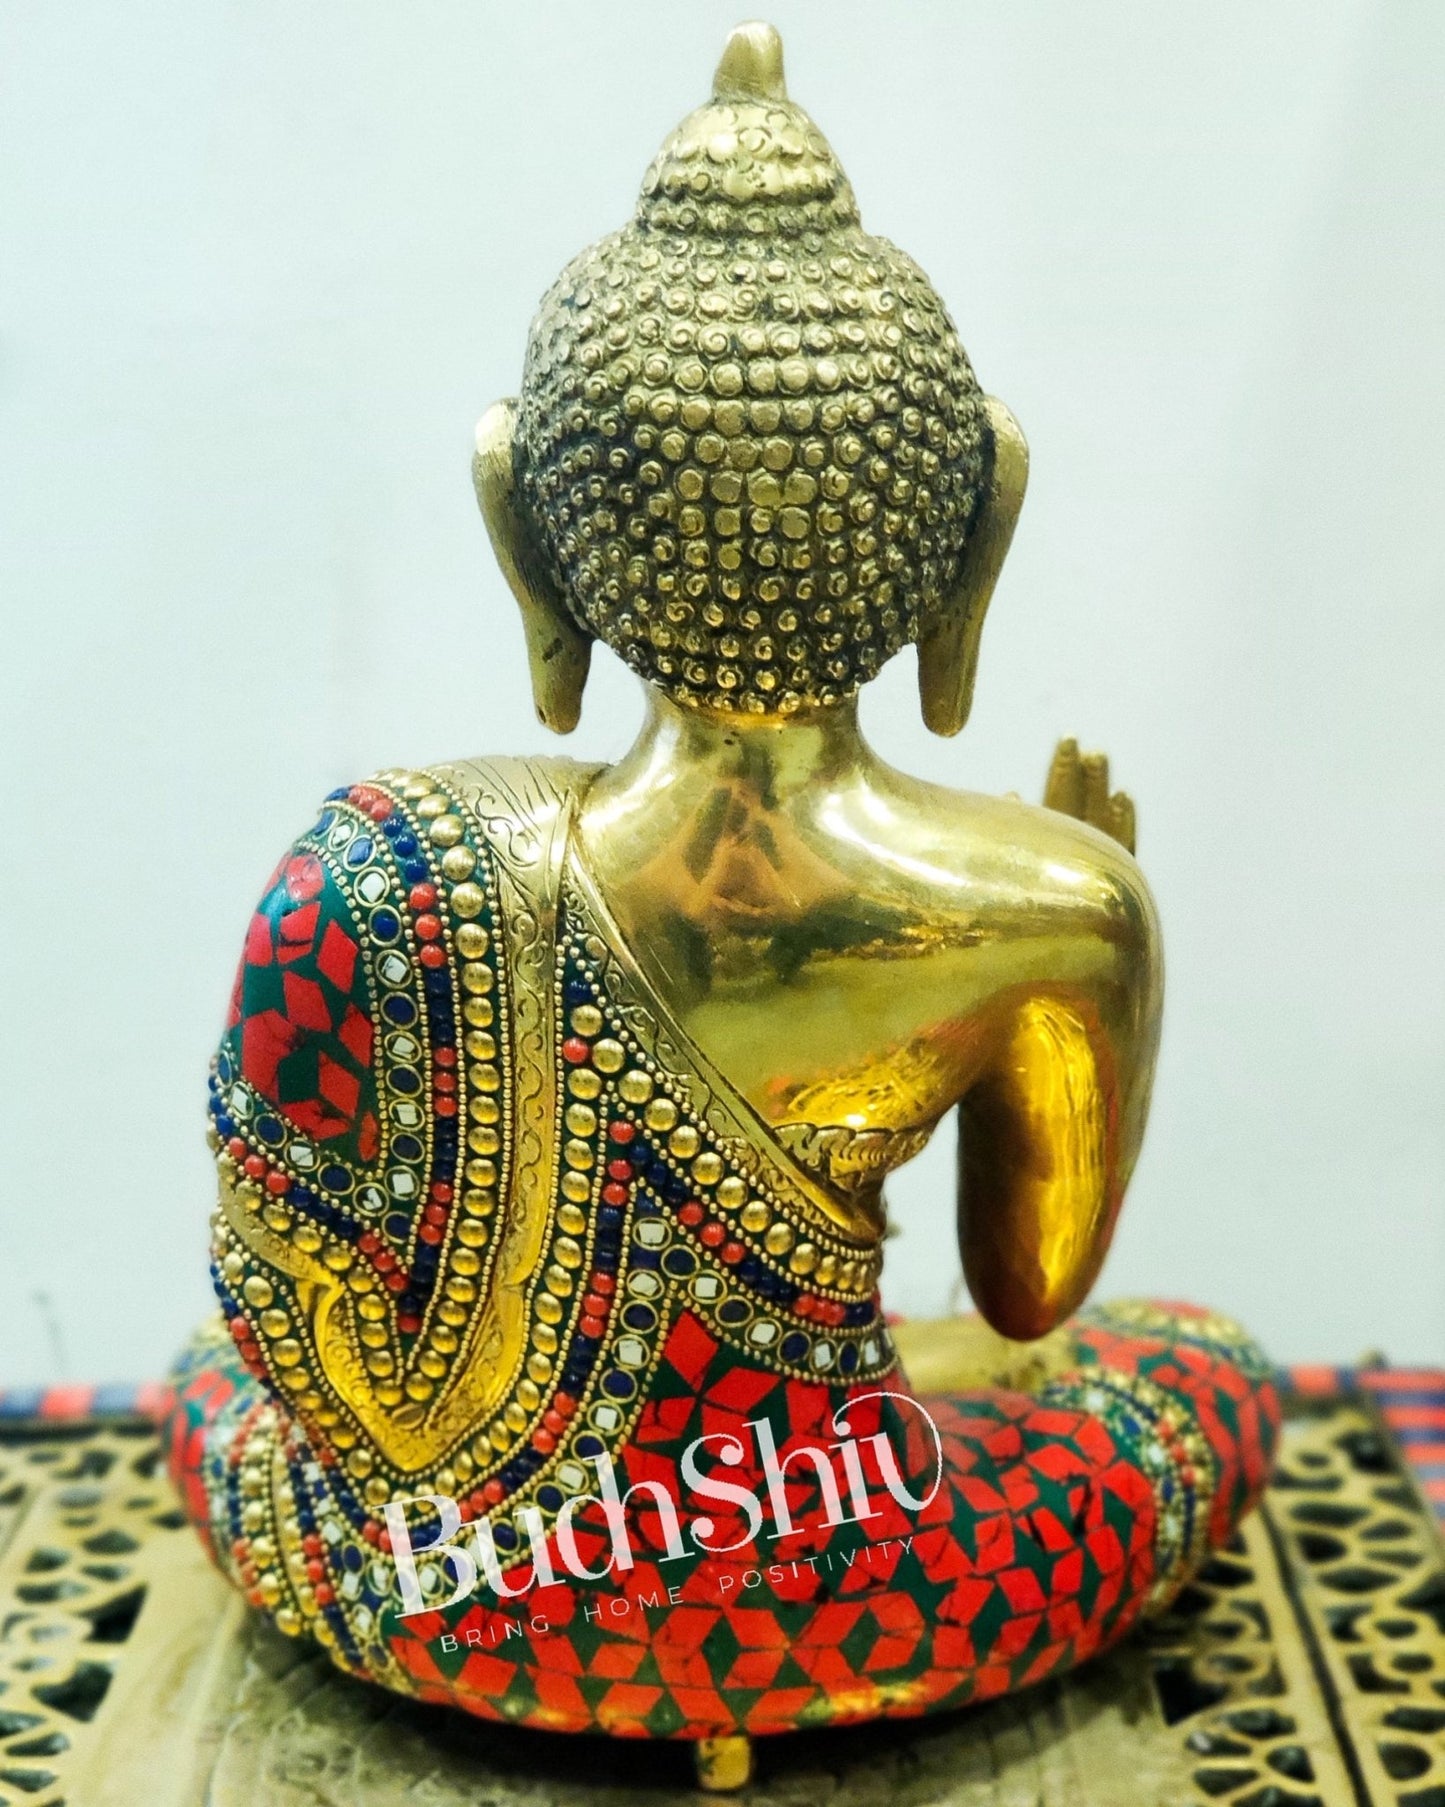 Pure Brass Blessing Buddha statue with stonework 11.5 inches - Budhshiv.com